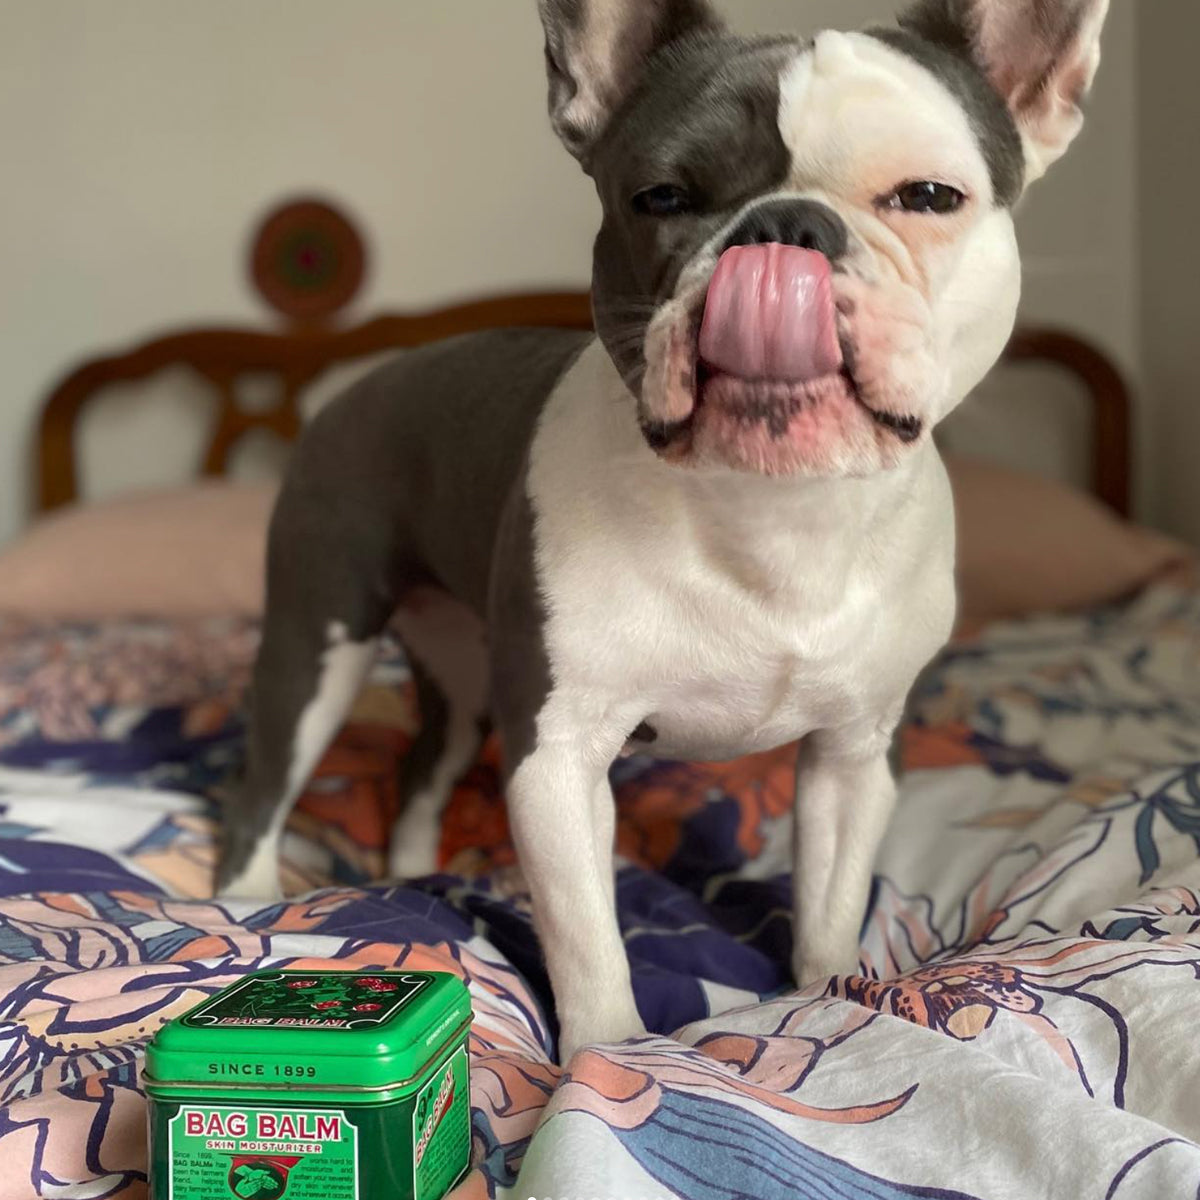 A small gray and white dog with its tongue out next to a tin of Bag Balm